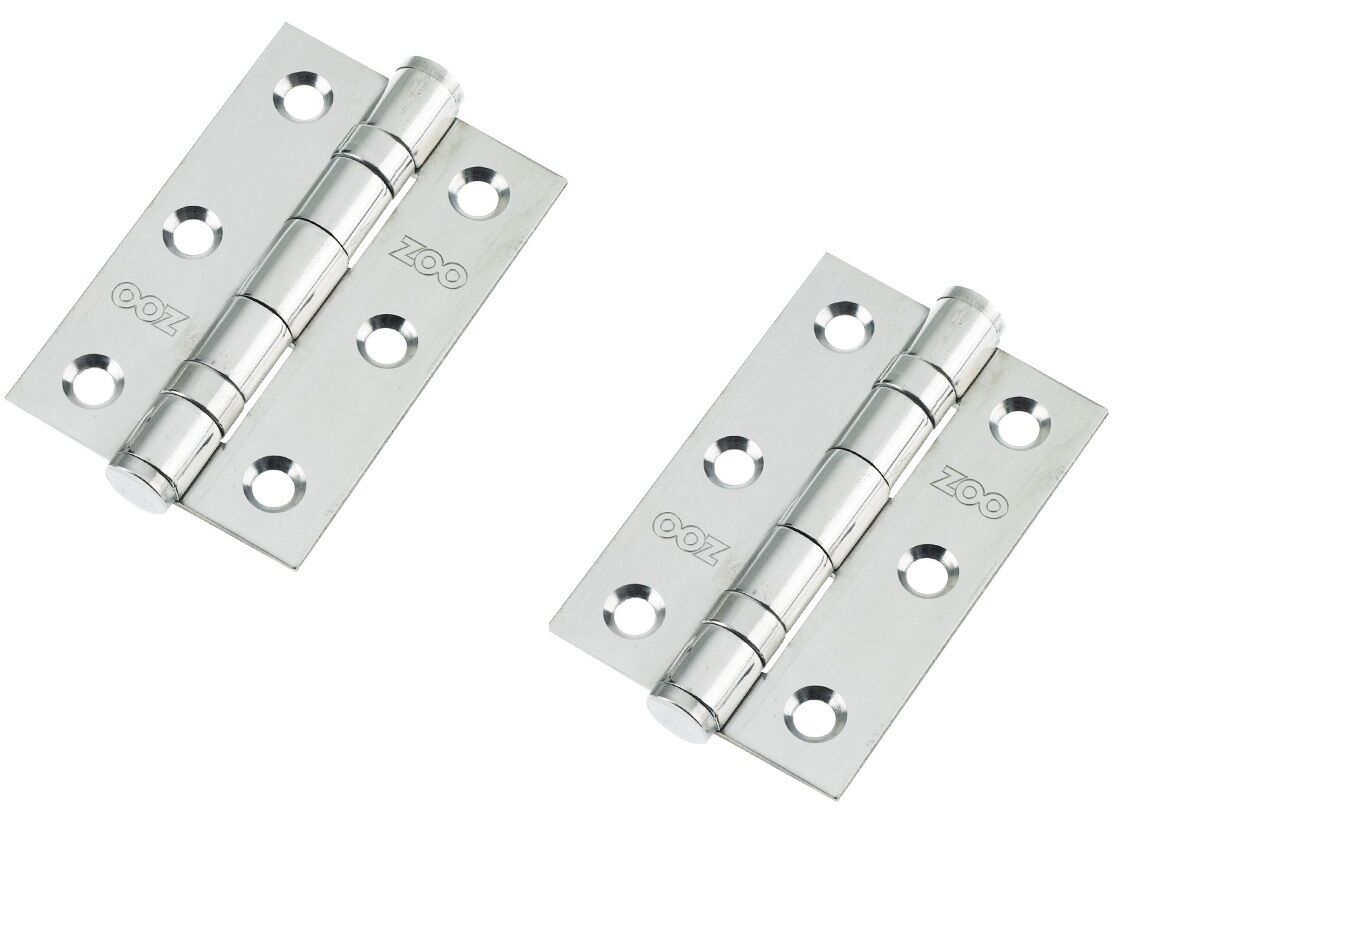 76 x 50 x 2mm Ball Bearing Butt Hinge, Polished Stainless Steel